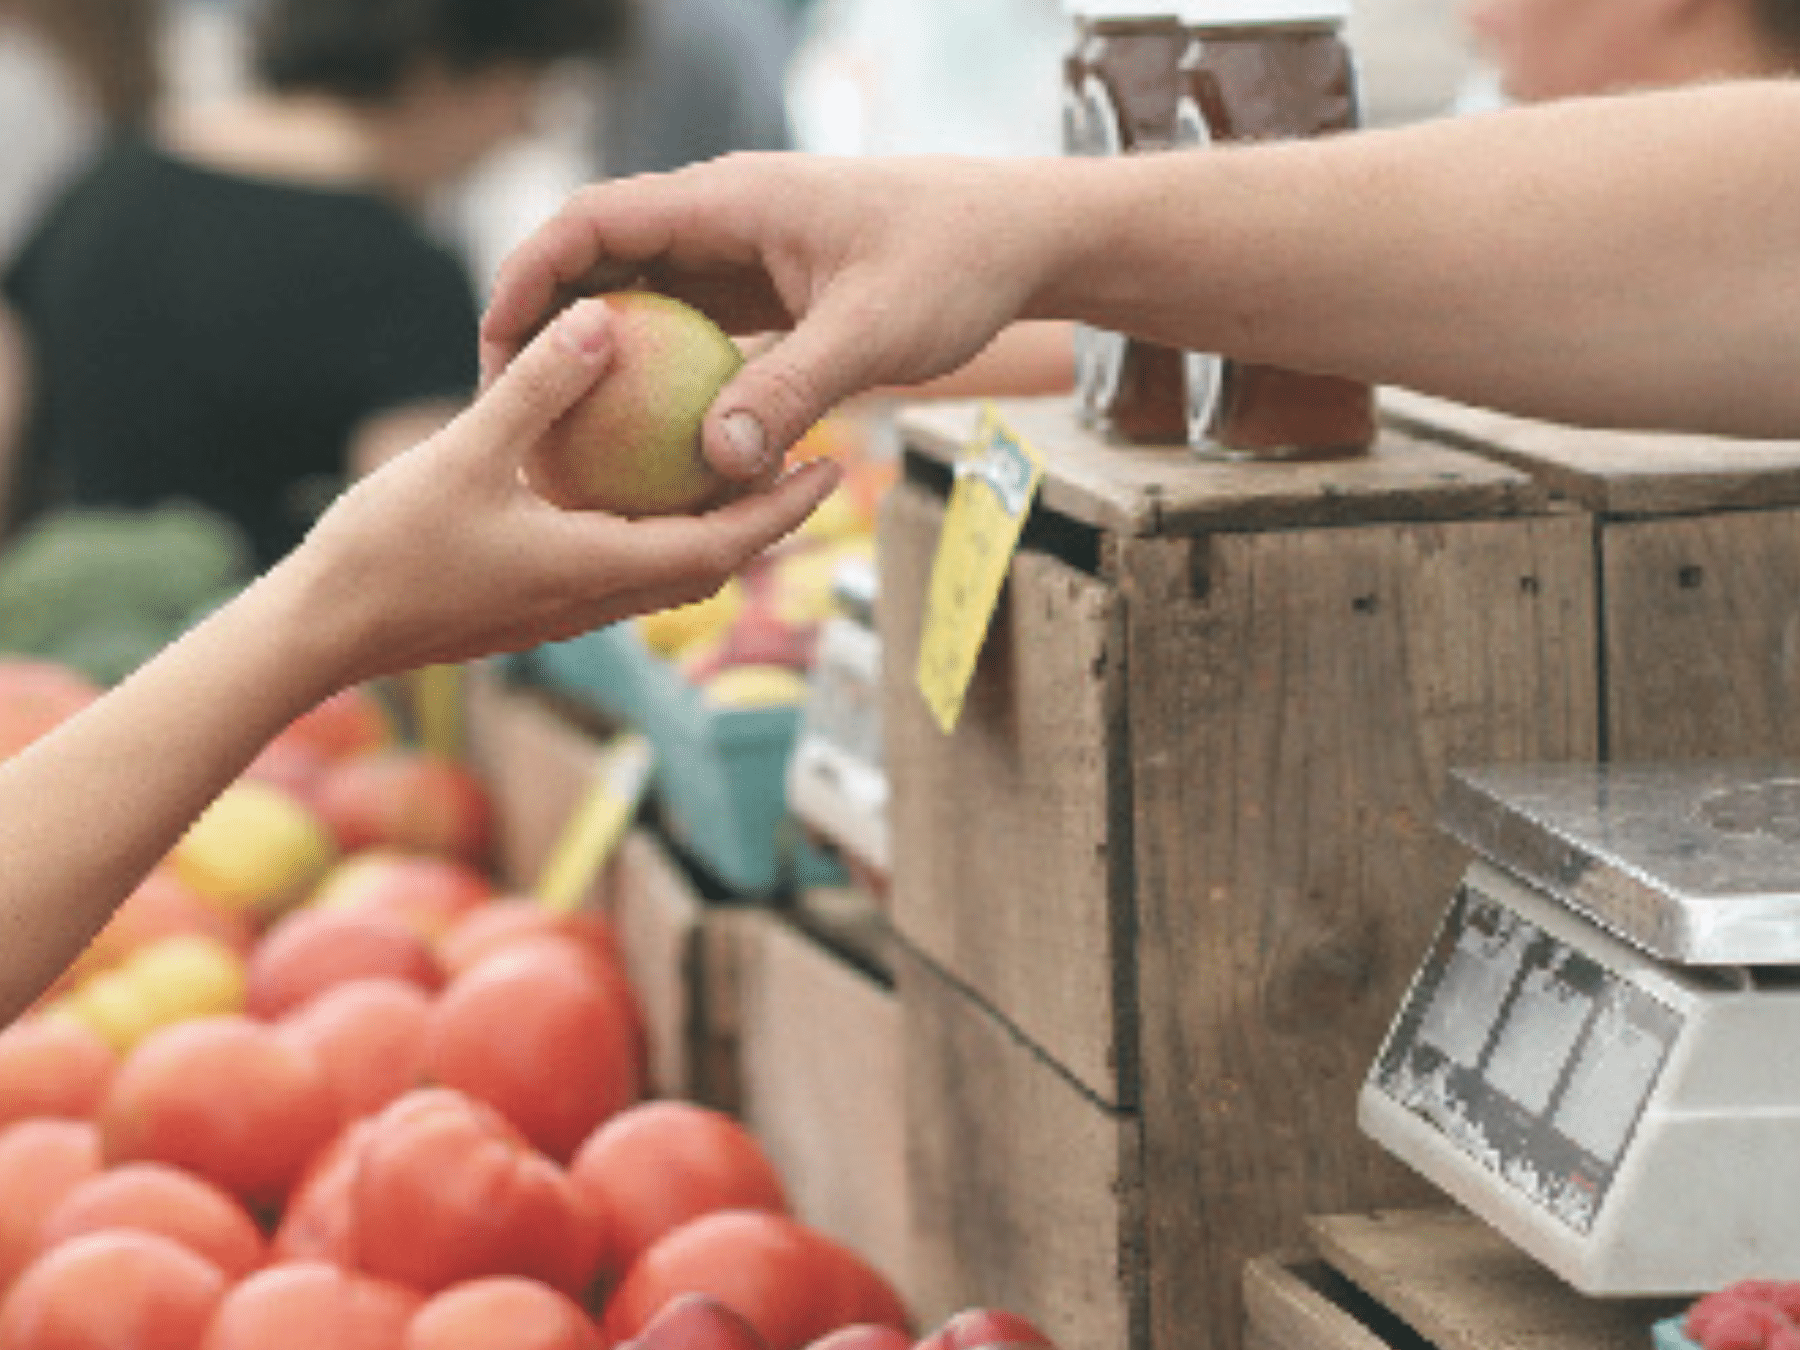 An image showing the hands of two individuals exchanging apples in a market place.